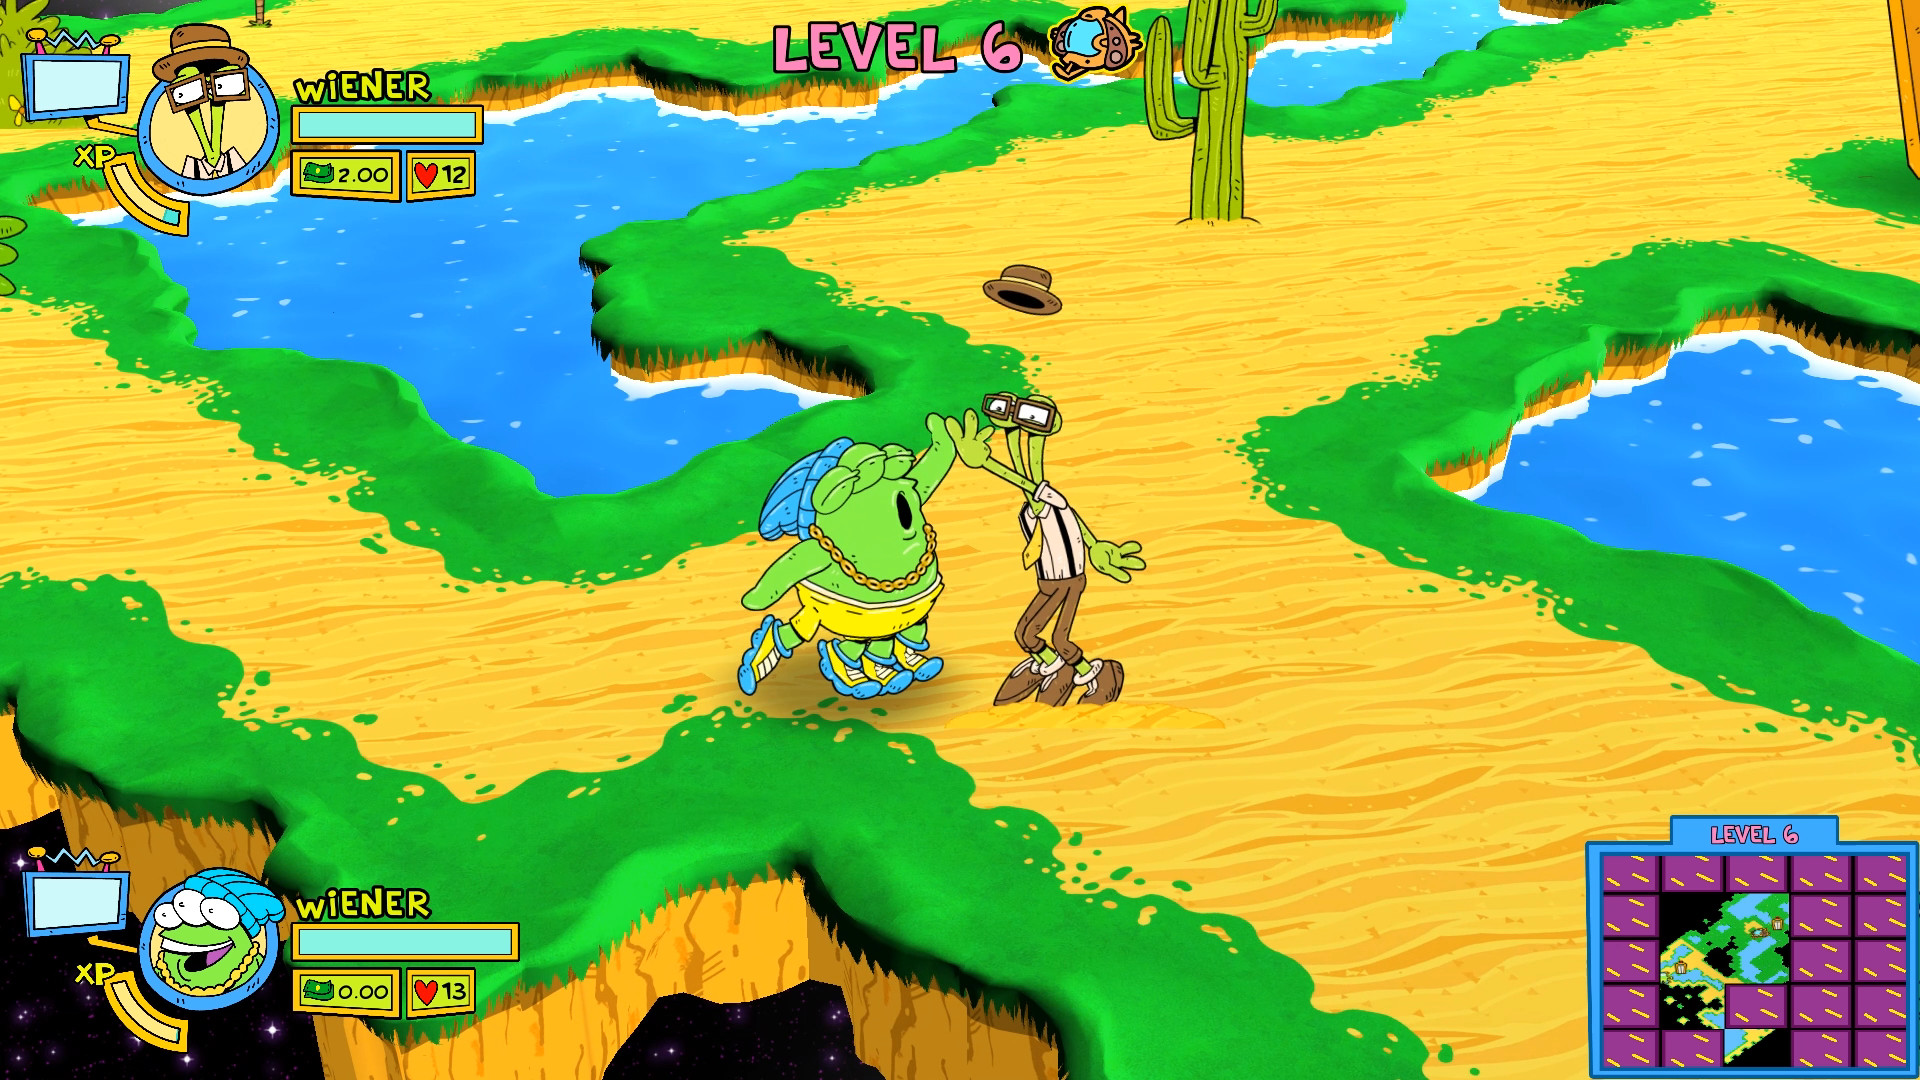 Save 75% on ToeJam & Earl: Back in the Groove! on Steam